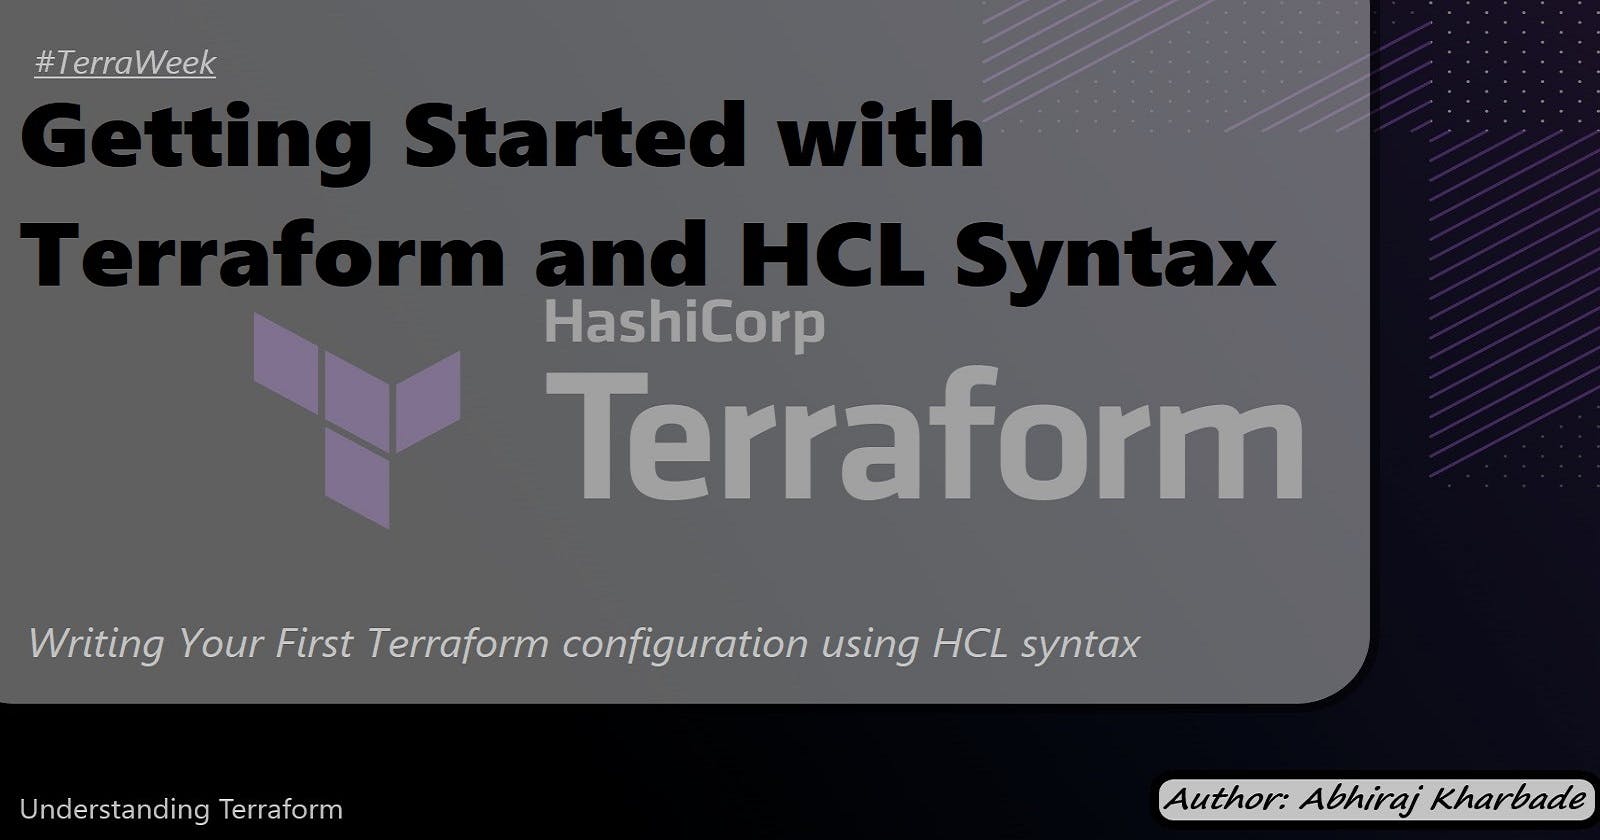 Getting Started with Terraform and HCL Syntax